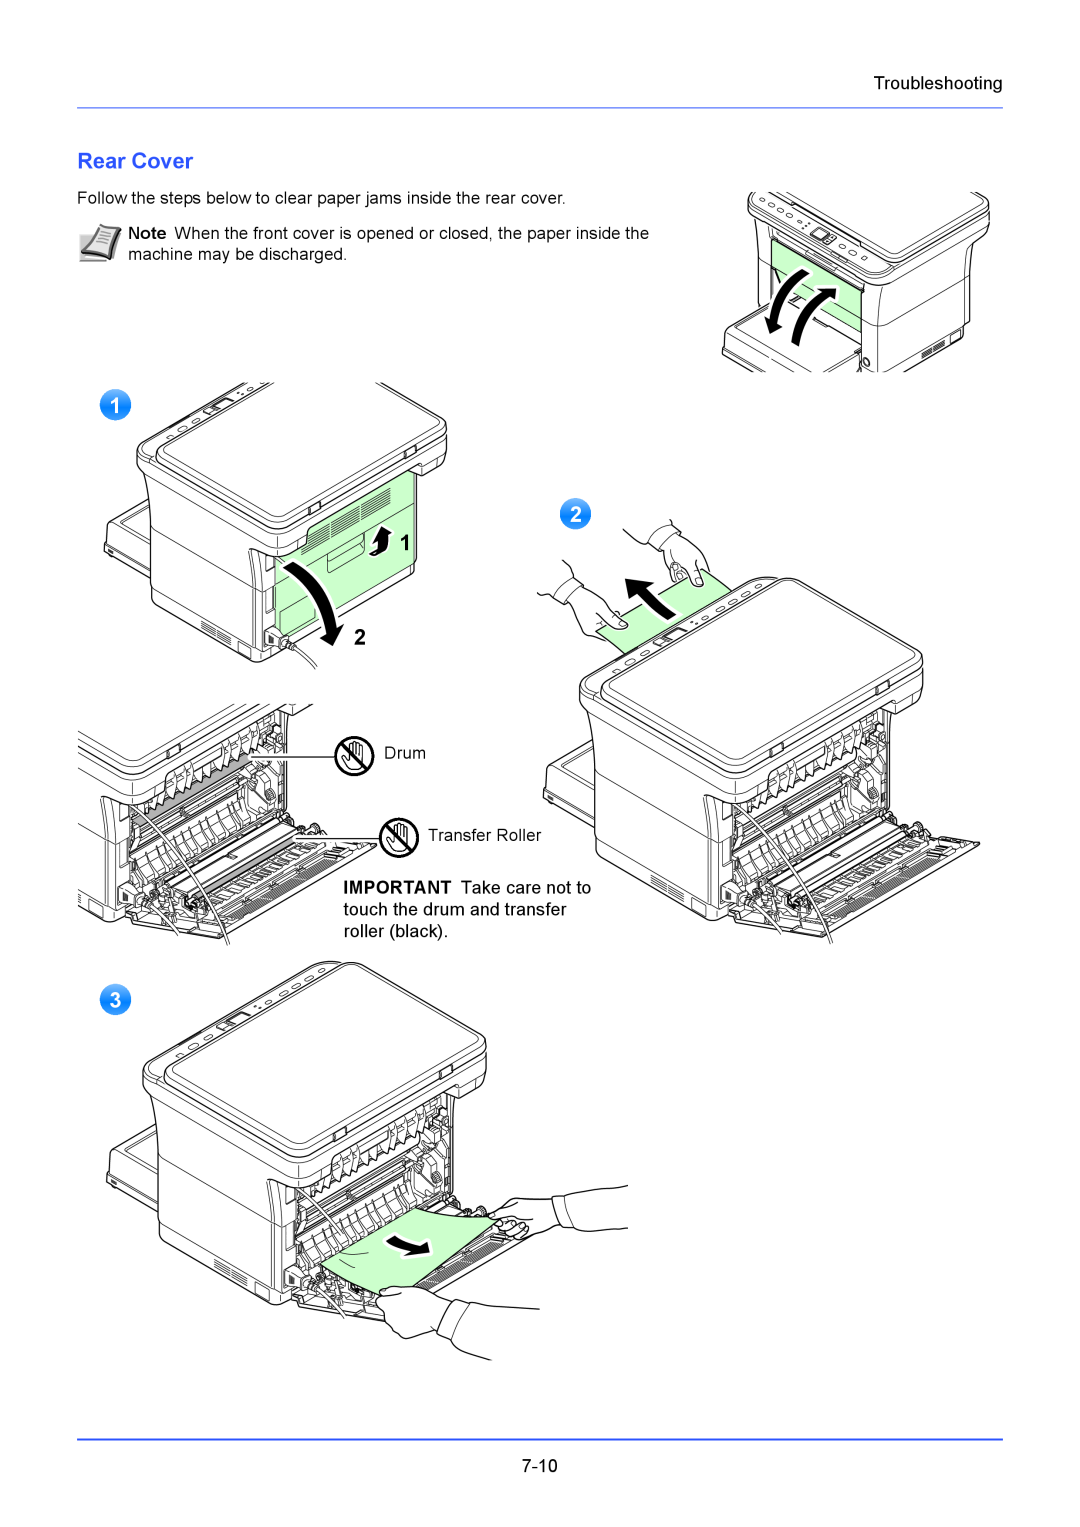 Kyocera FS-1020MFP Rear Cover, Troubleshooting, Follow the steps below to clear paper jams inside the rear cover, 7-10 